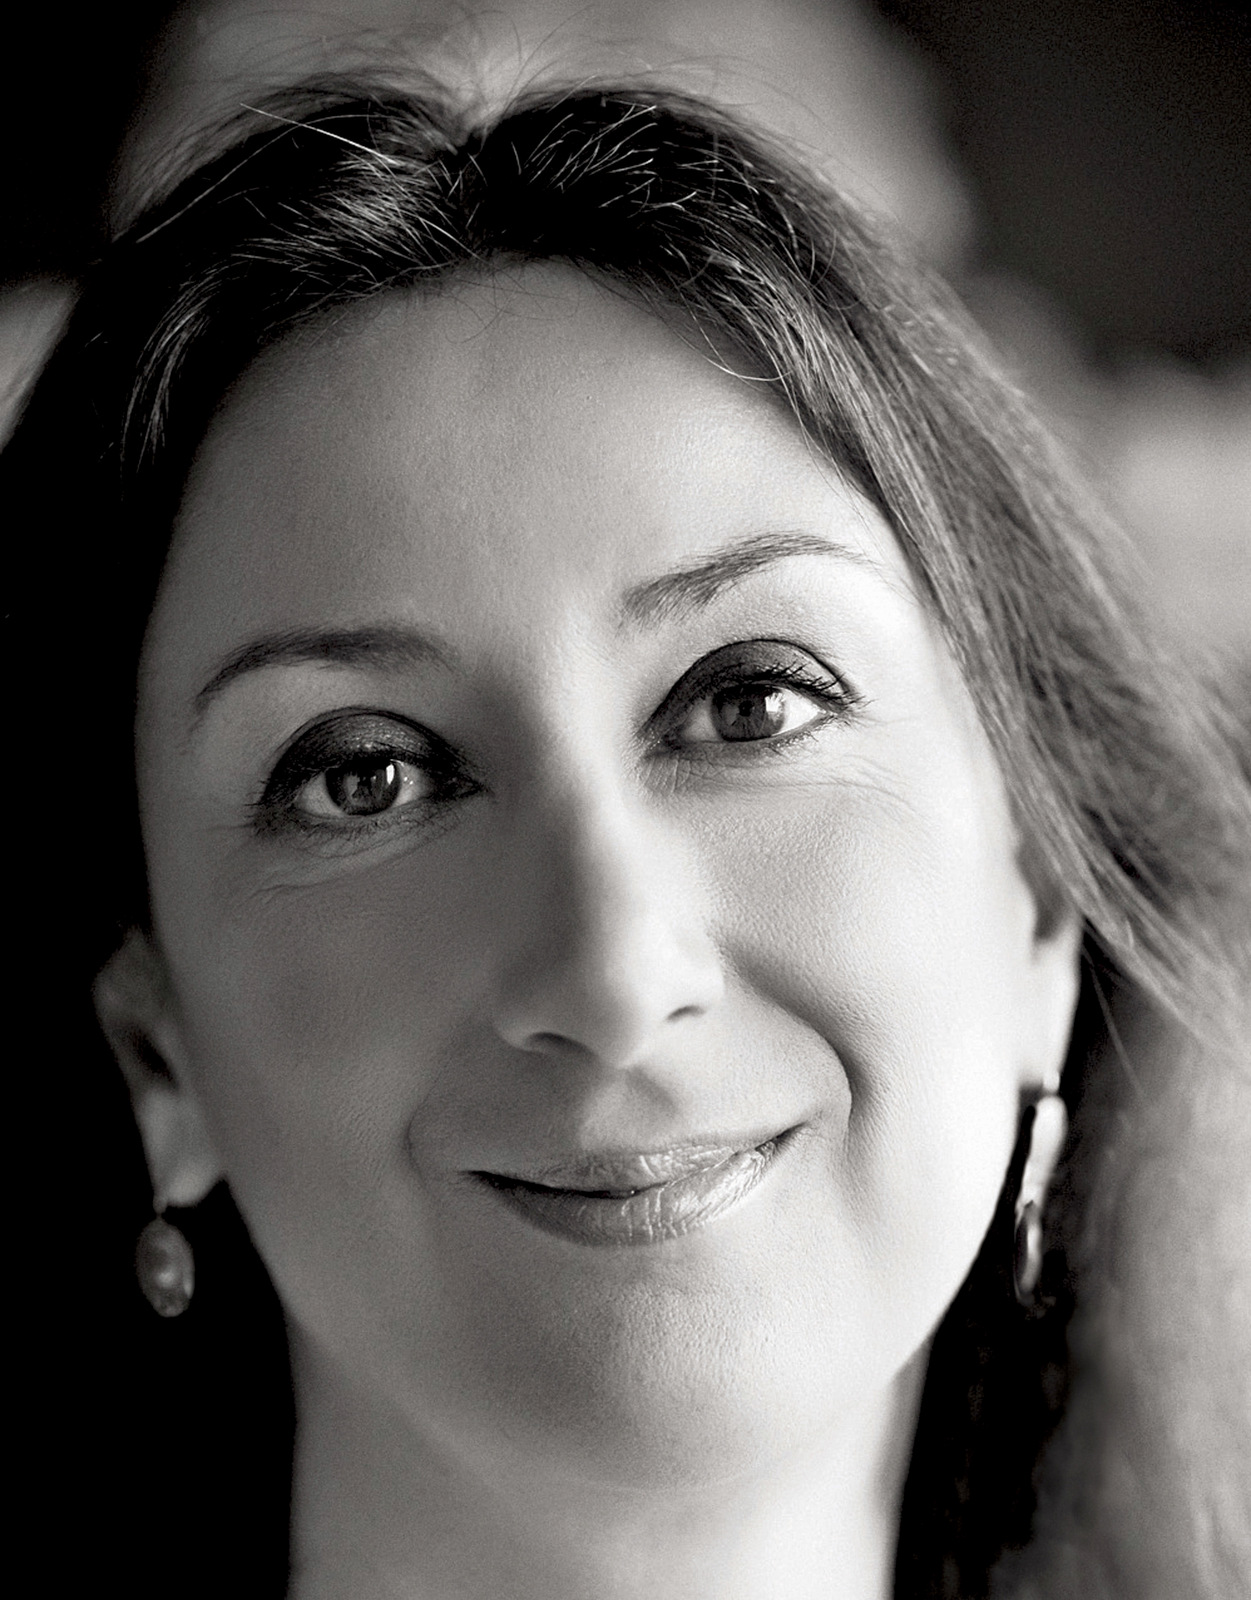 This undated photo shows Daphne Caruana Galizia, a Maltese investigative journalist who exposed her island nation’s links with the so-called Panama Papers. (The Malta Independent via AP)